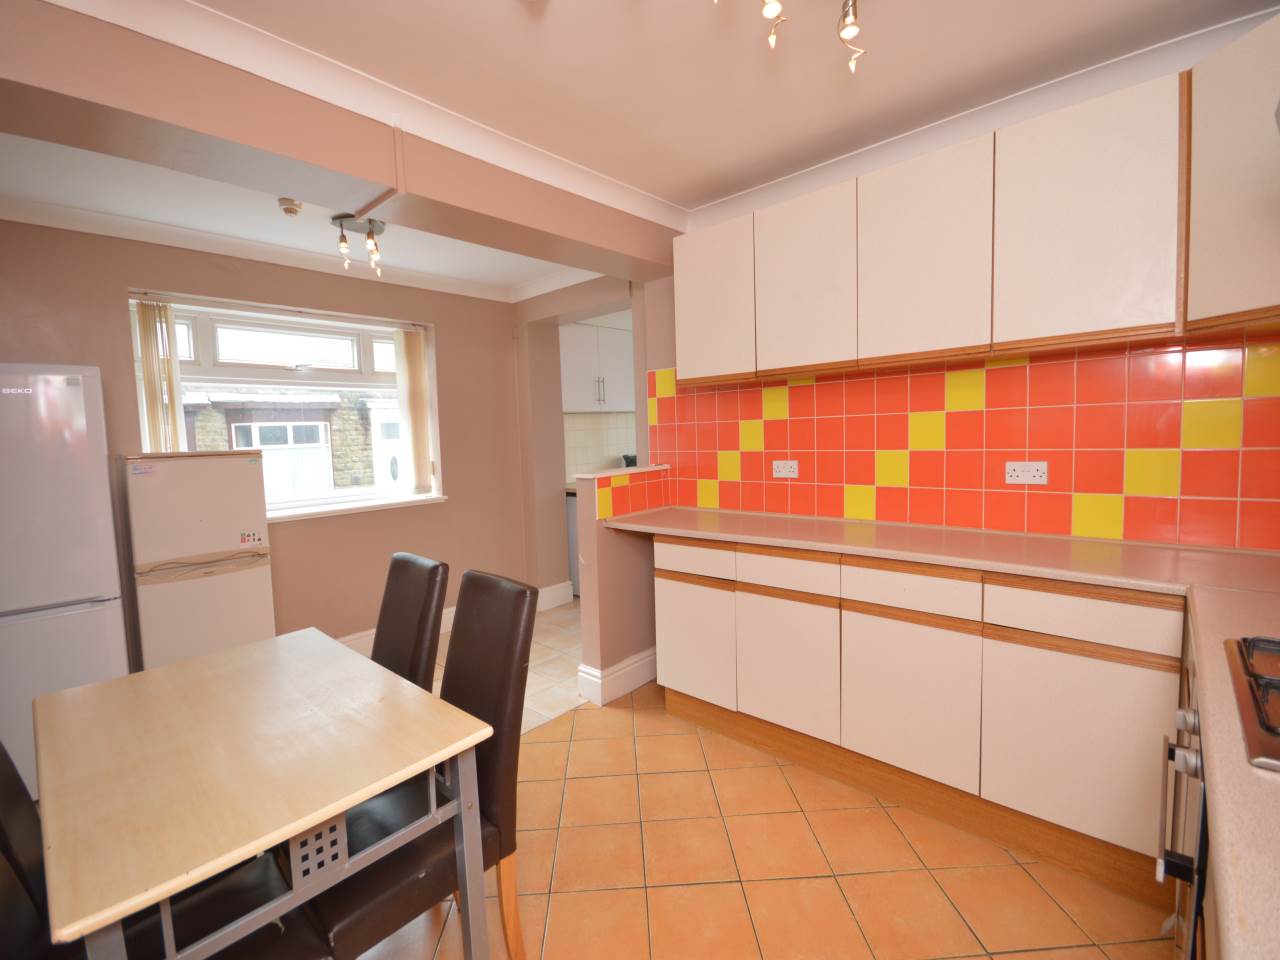 5 bed house to rent in DE BREOS STREET, BRYNMILL  - Property Image 2